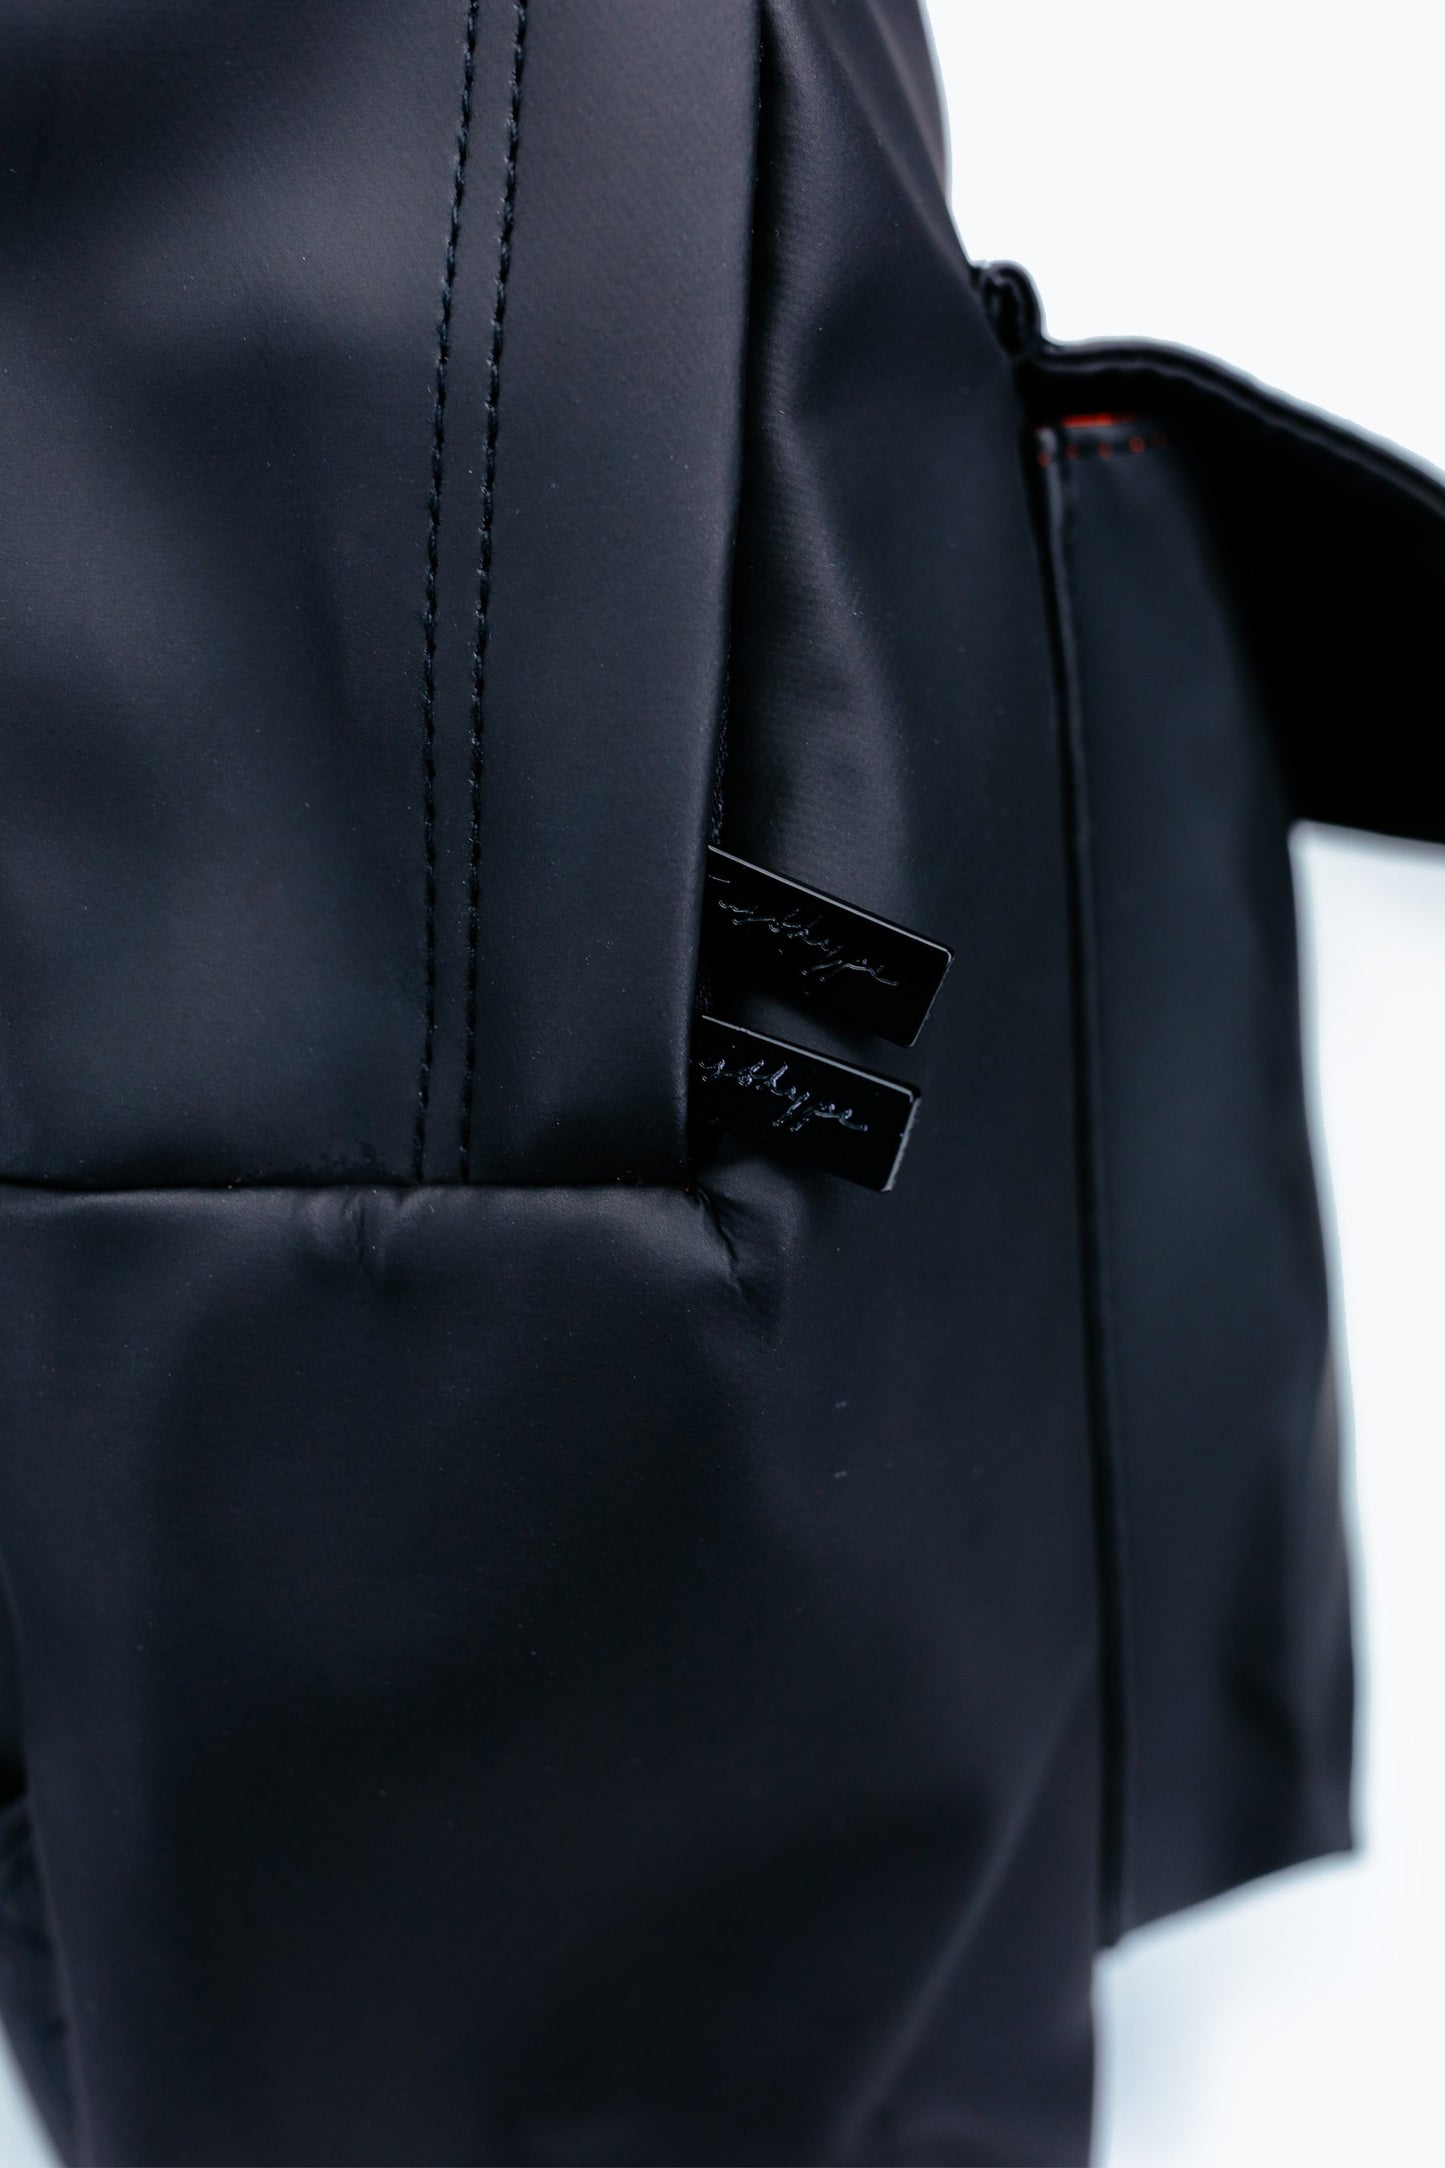 Hype Black Leather Civil Backpack